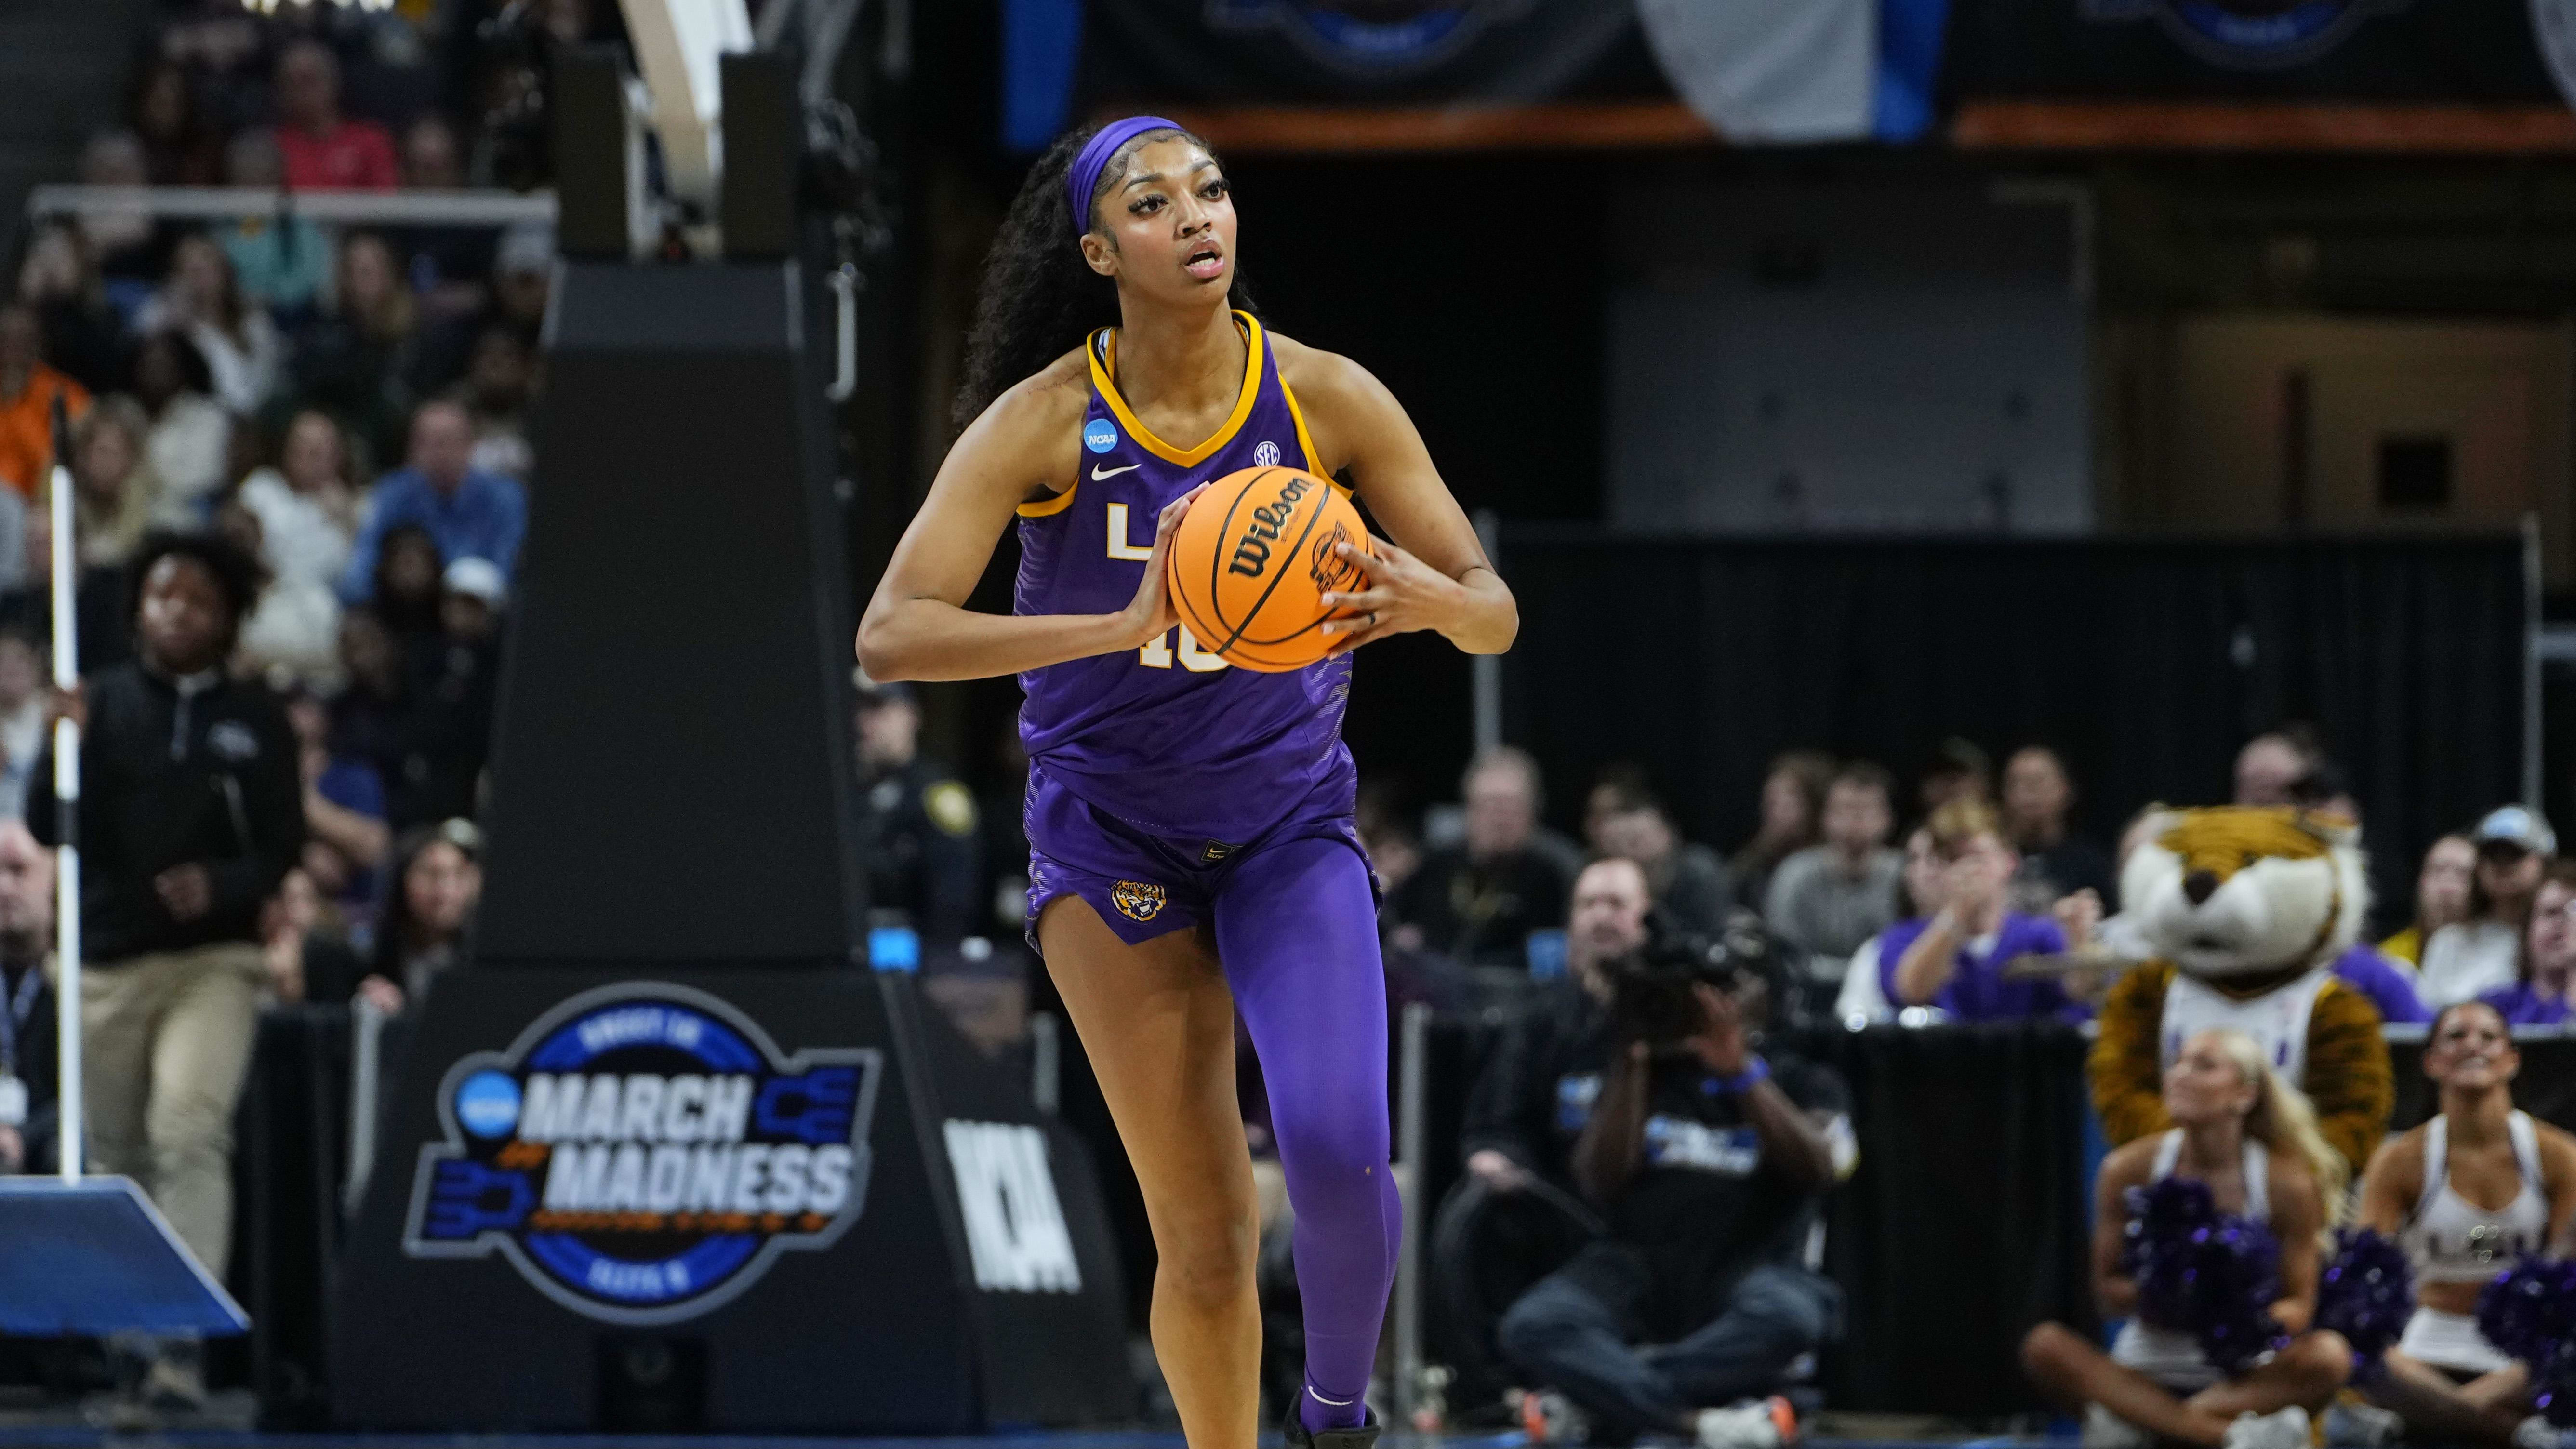 LSU Tigers forward Angel Reese passes the ball in the Elite Eight against Iowa.